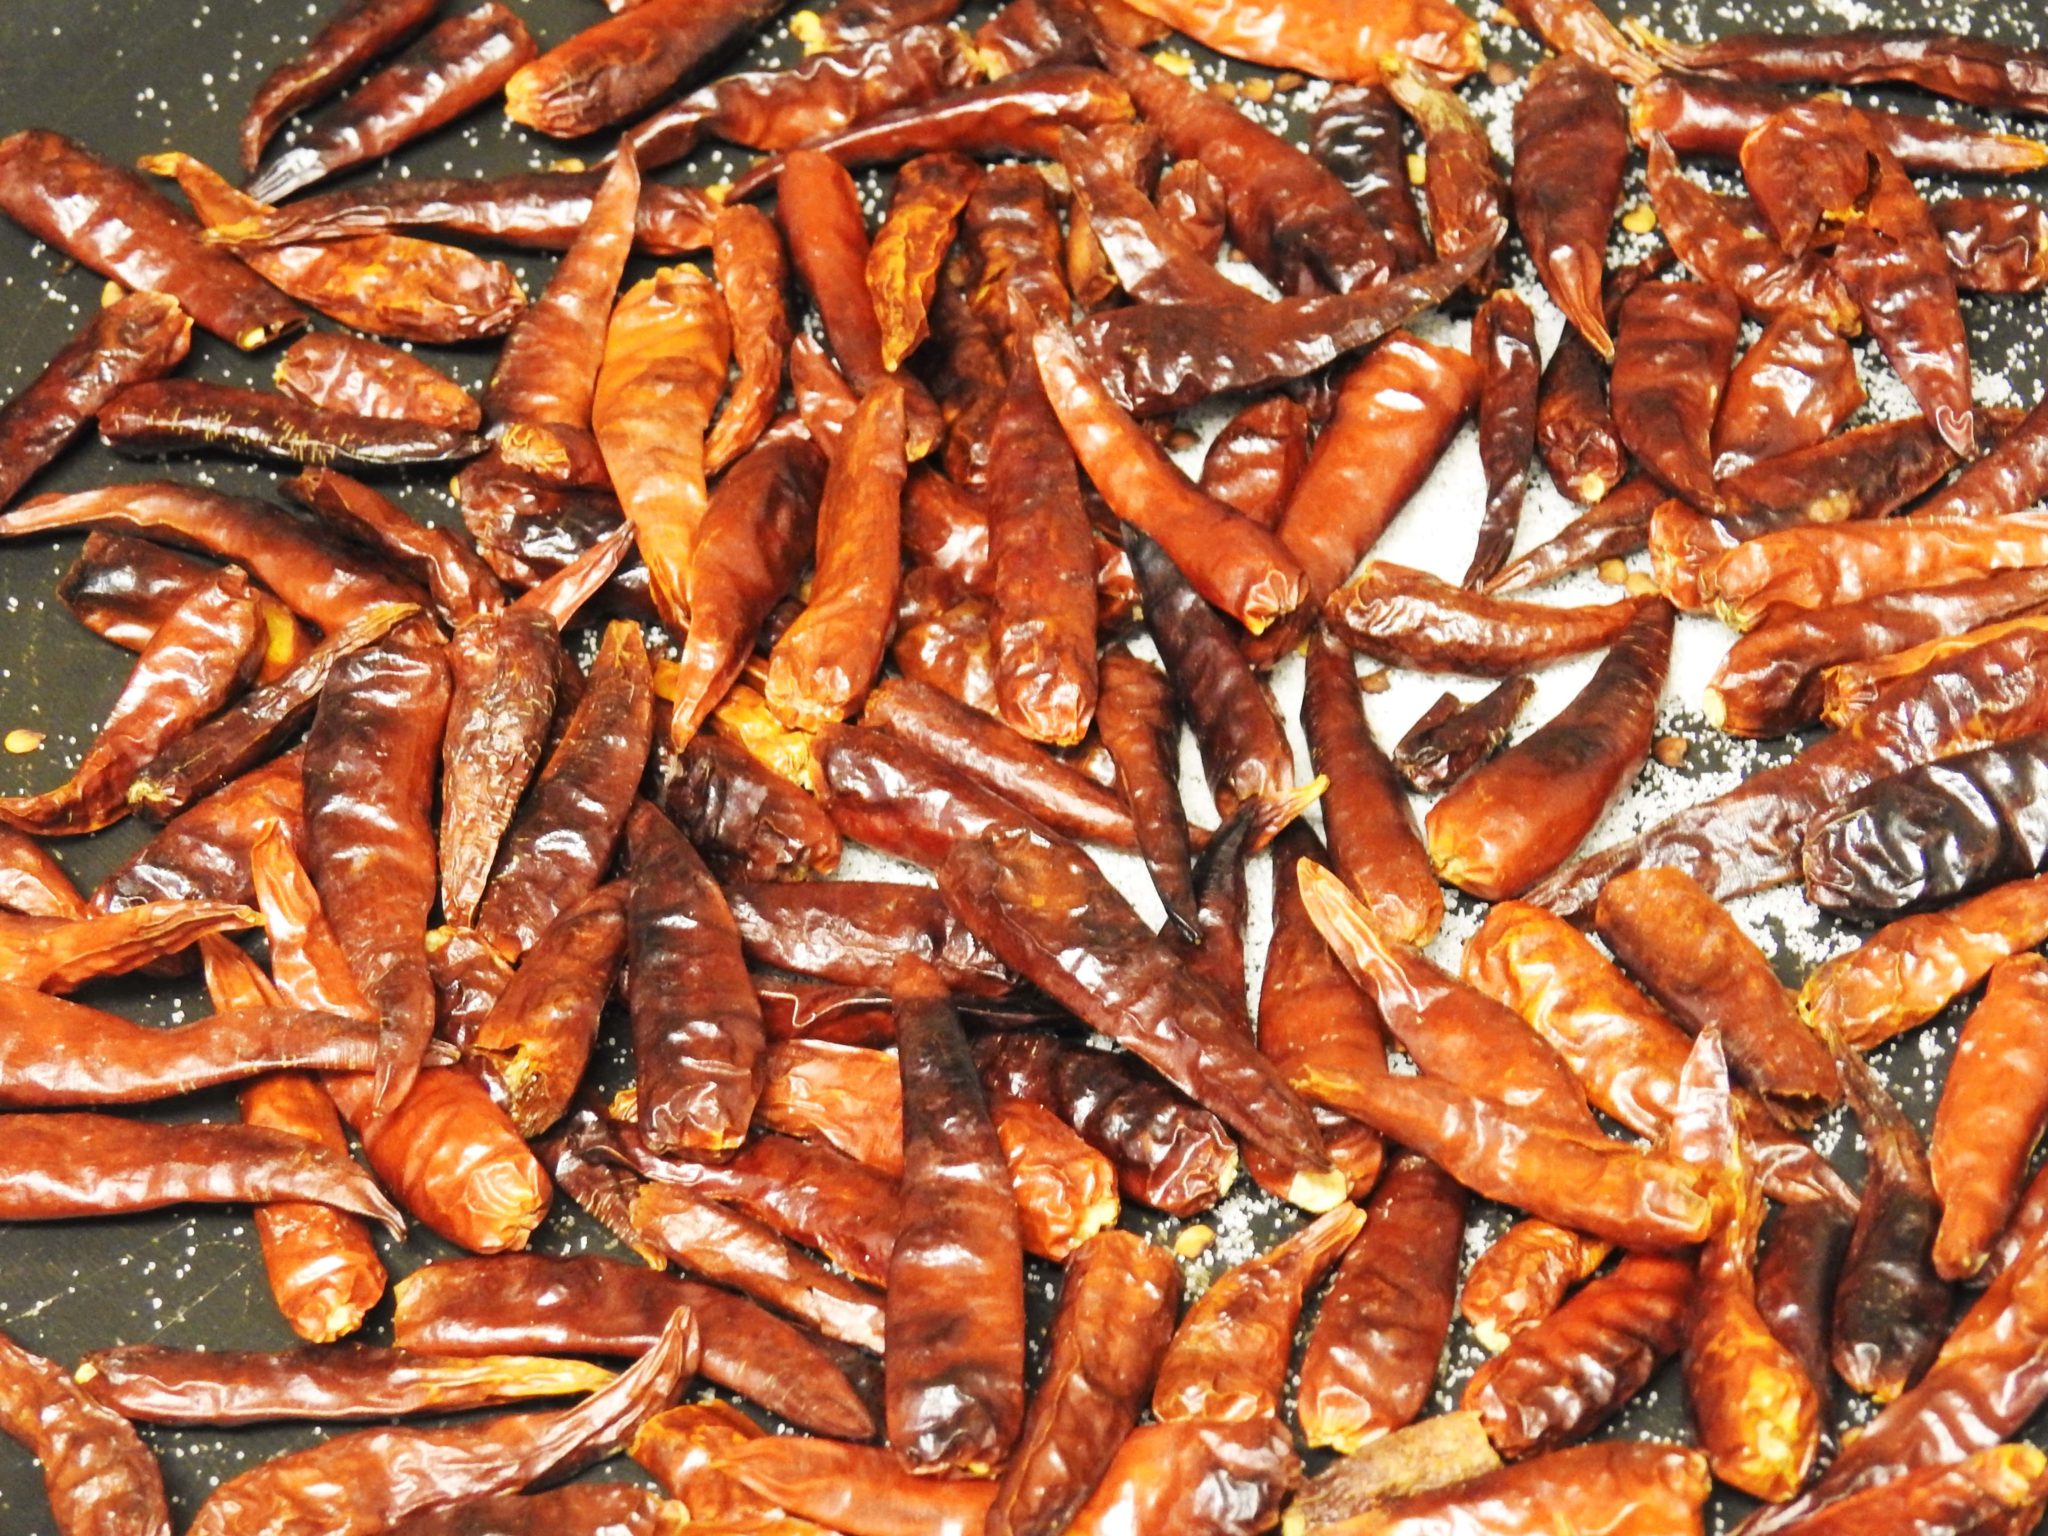 Dried Bird's Eye Chili toasted In A Pan